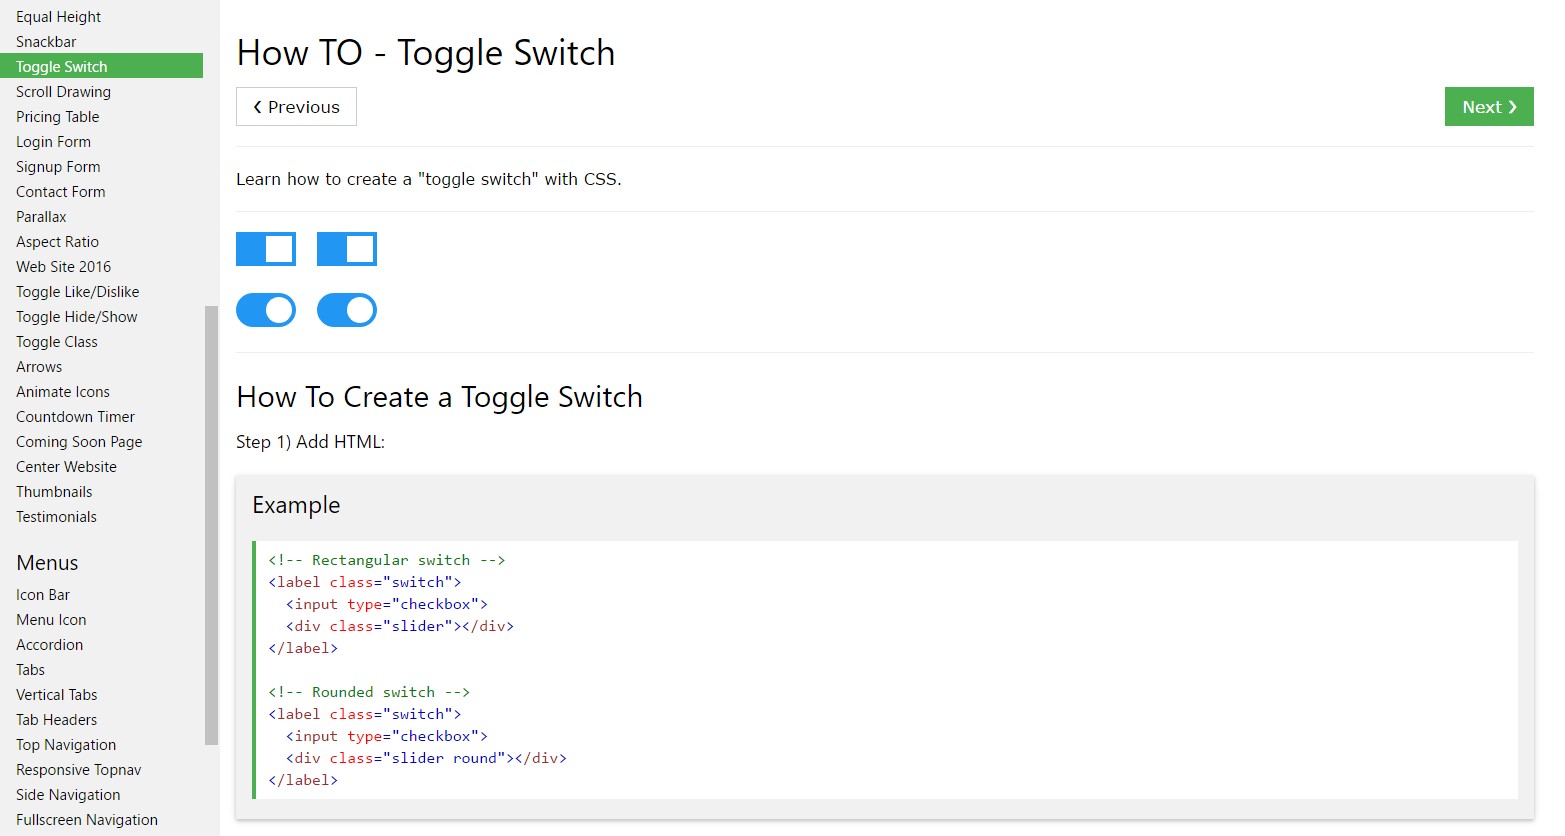  Tips on how to  establish Toggle Switch